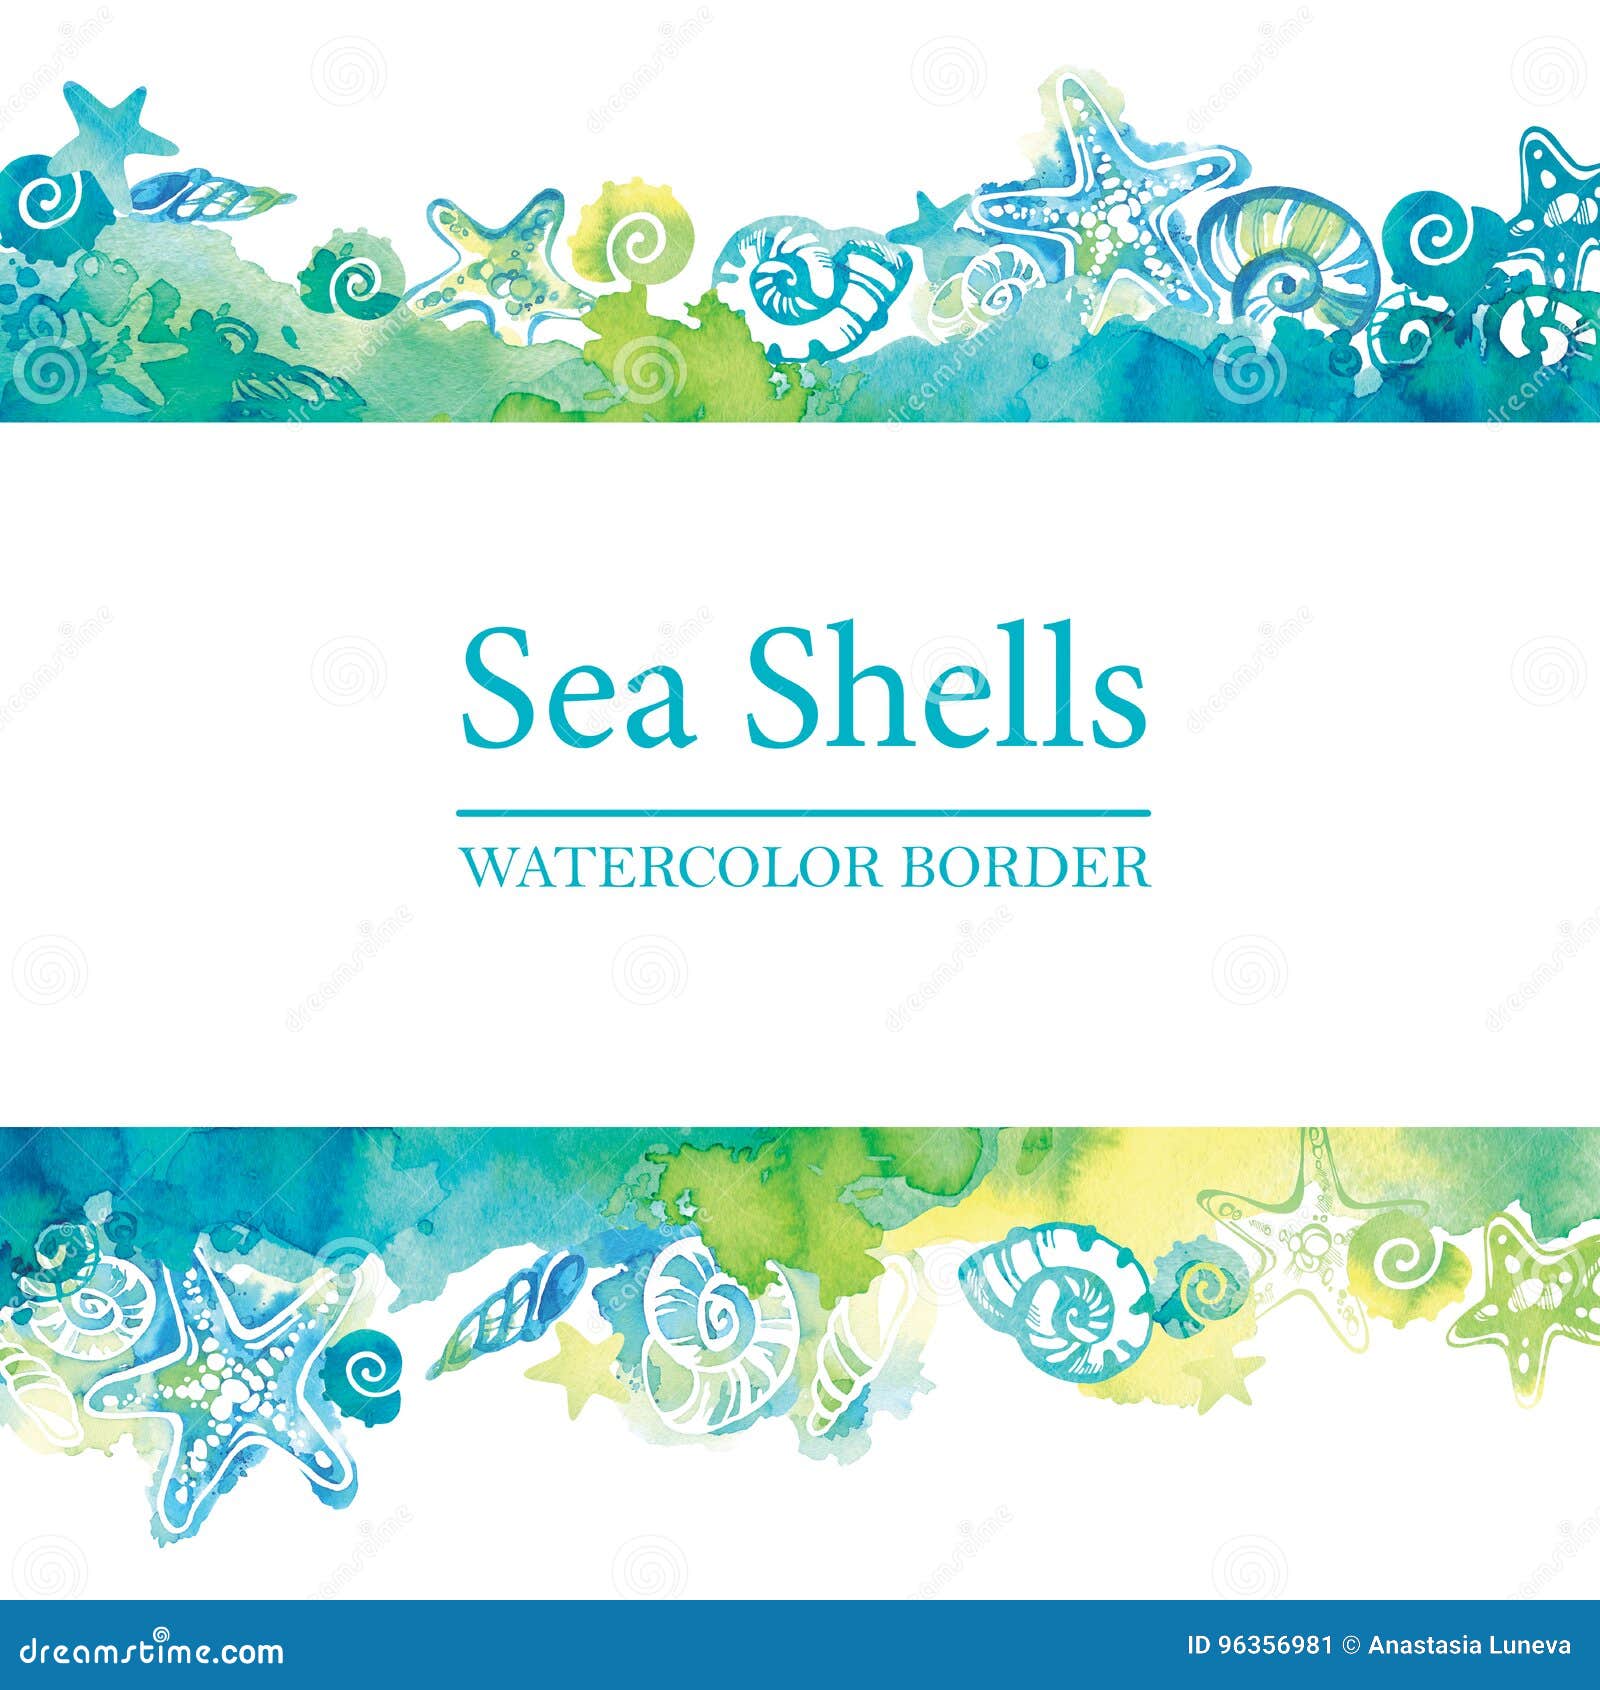 marine border with watercolor sea shells. sea life frame. summer travel background.